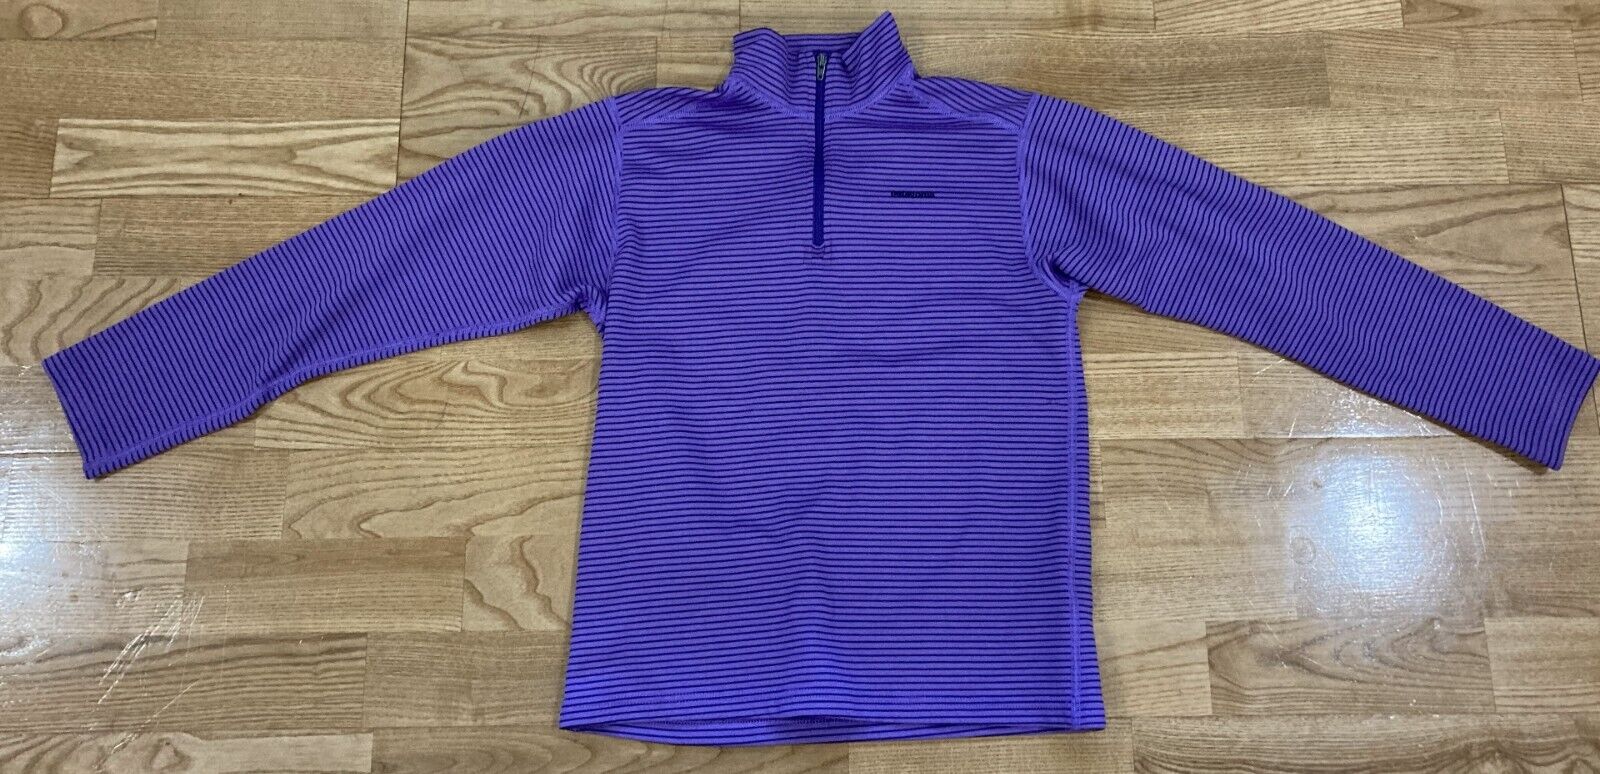 Girls Patagonia Purple Striped 1/4 Zip Pullover size MD 10 EUC